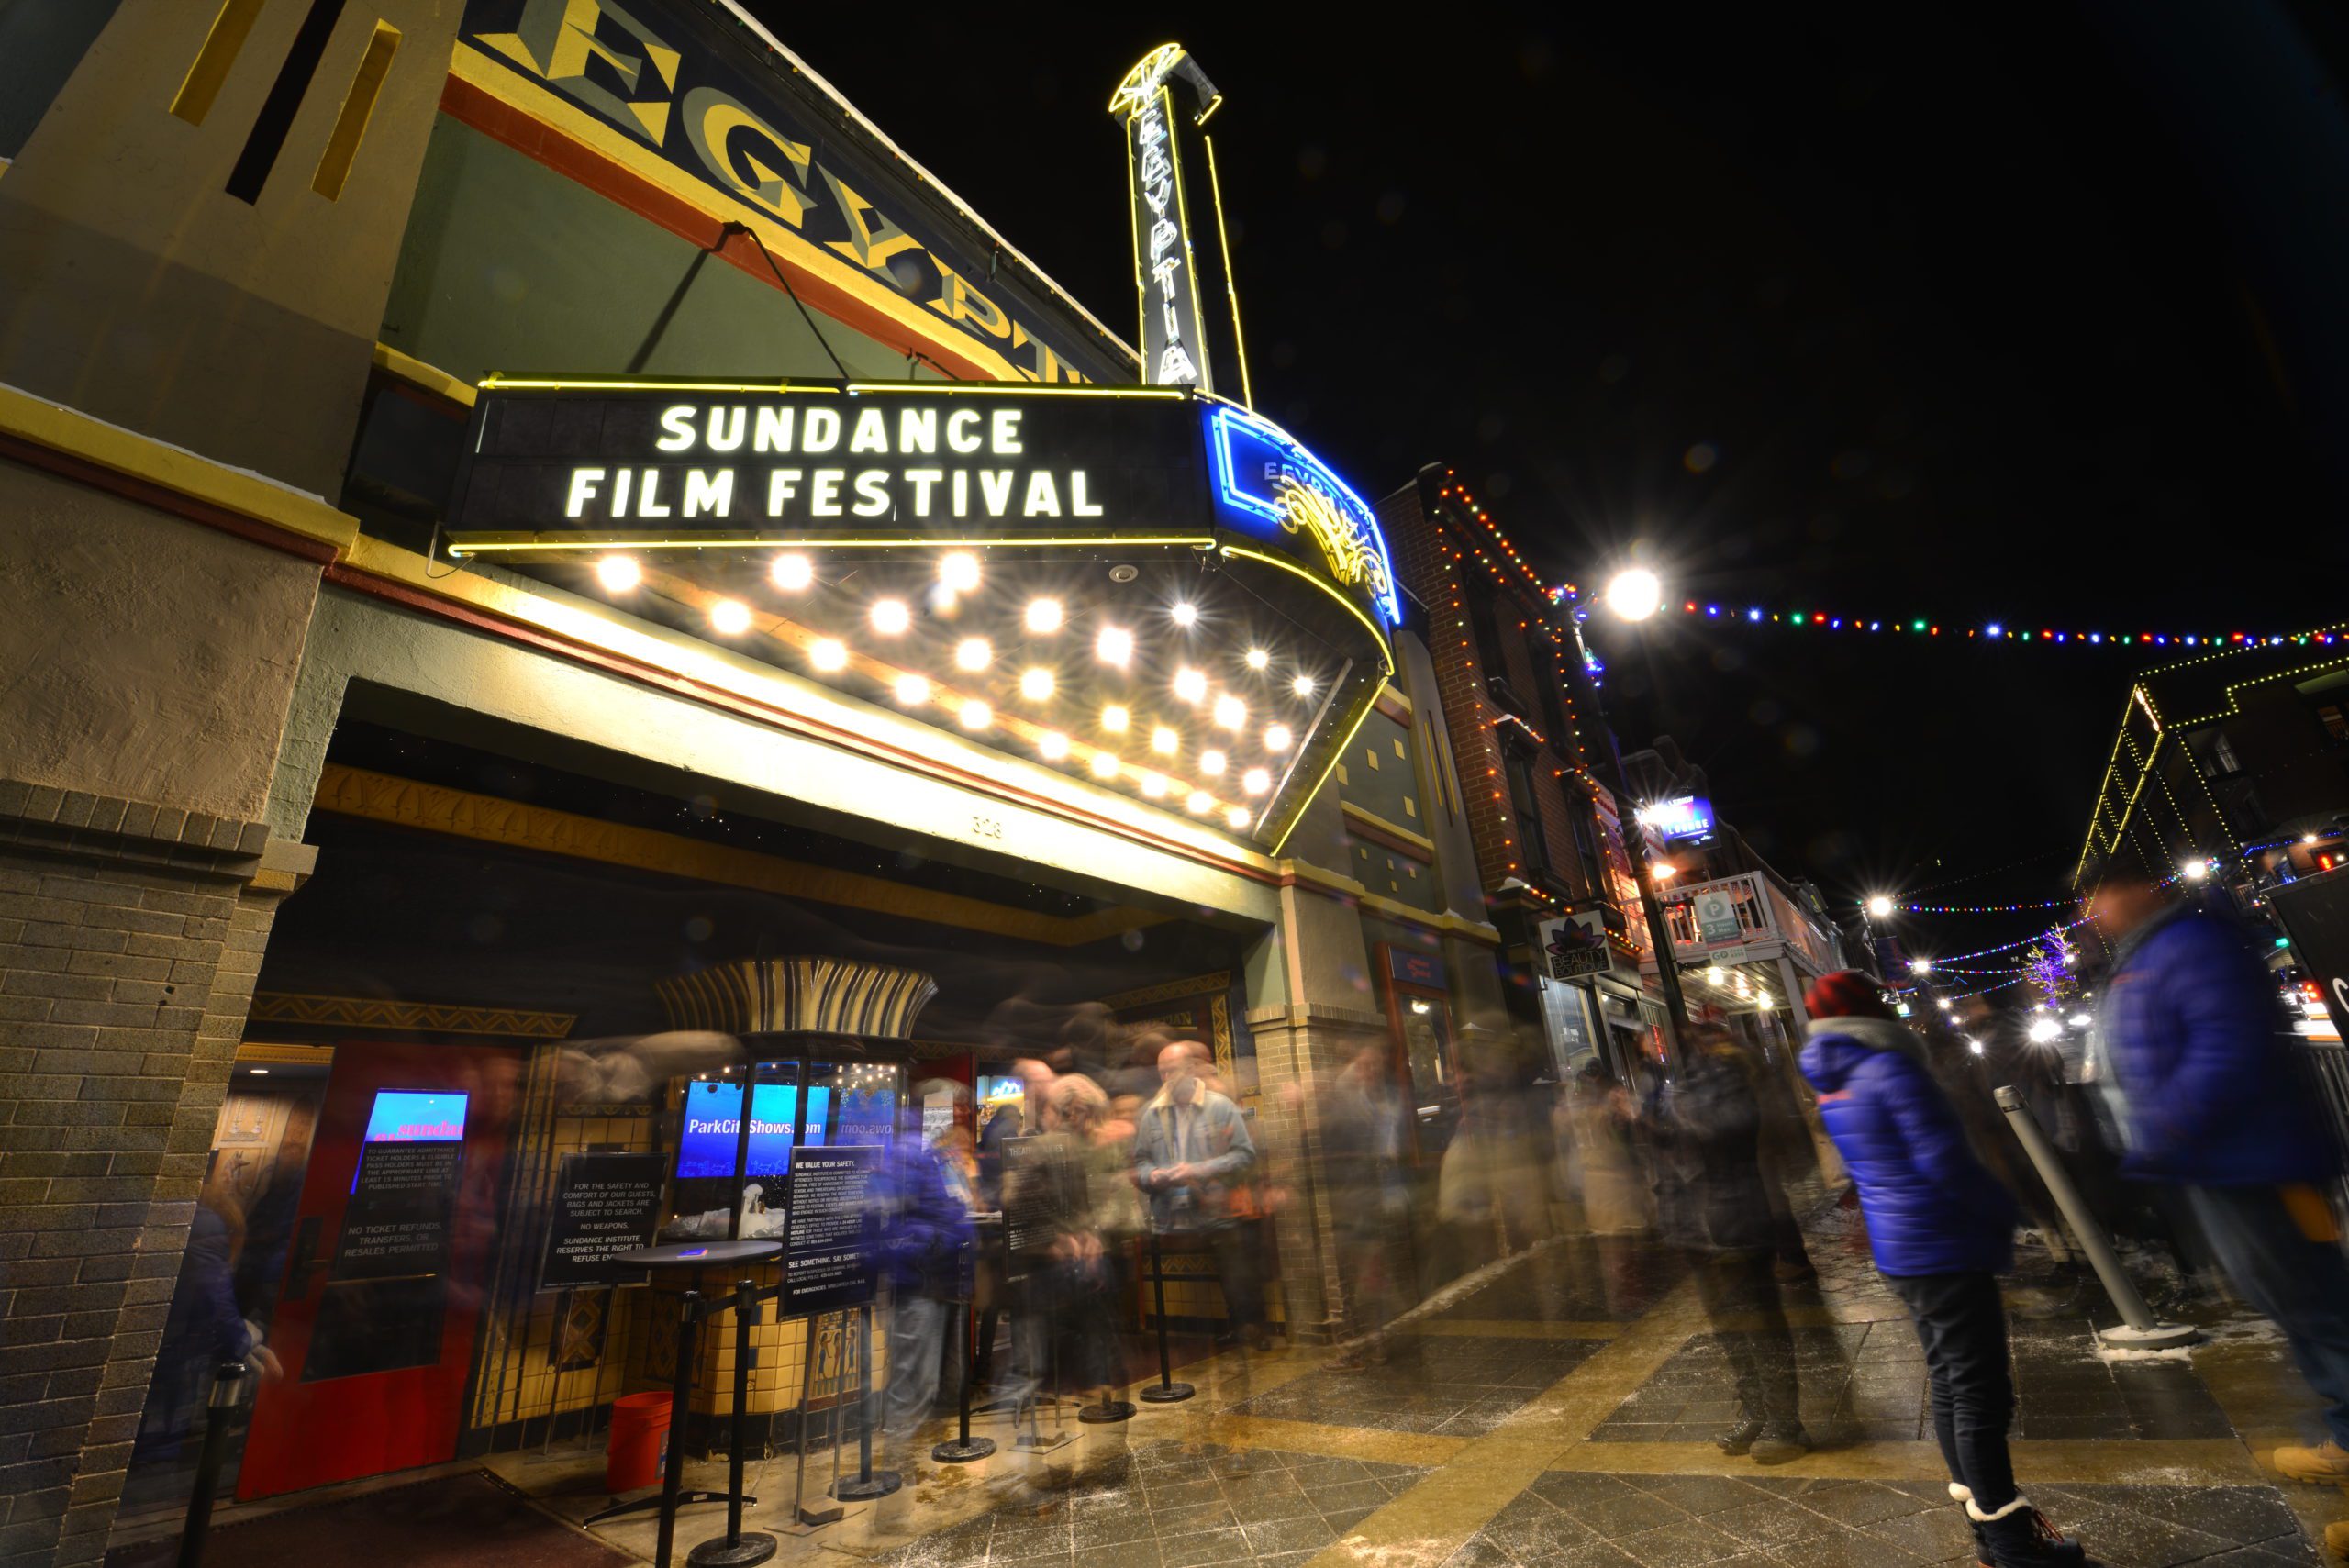 Sundance Film Festival Saw Larger Overall Attendance In 2023 With Hybrid Model Townlift Park